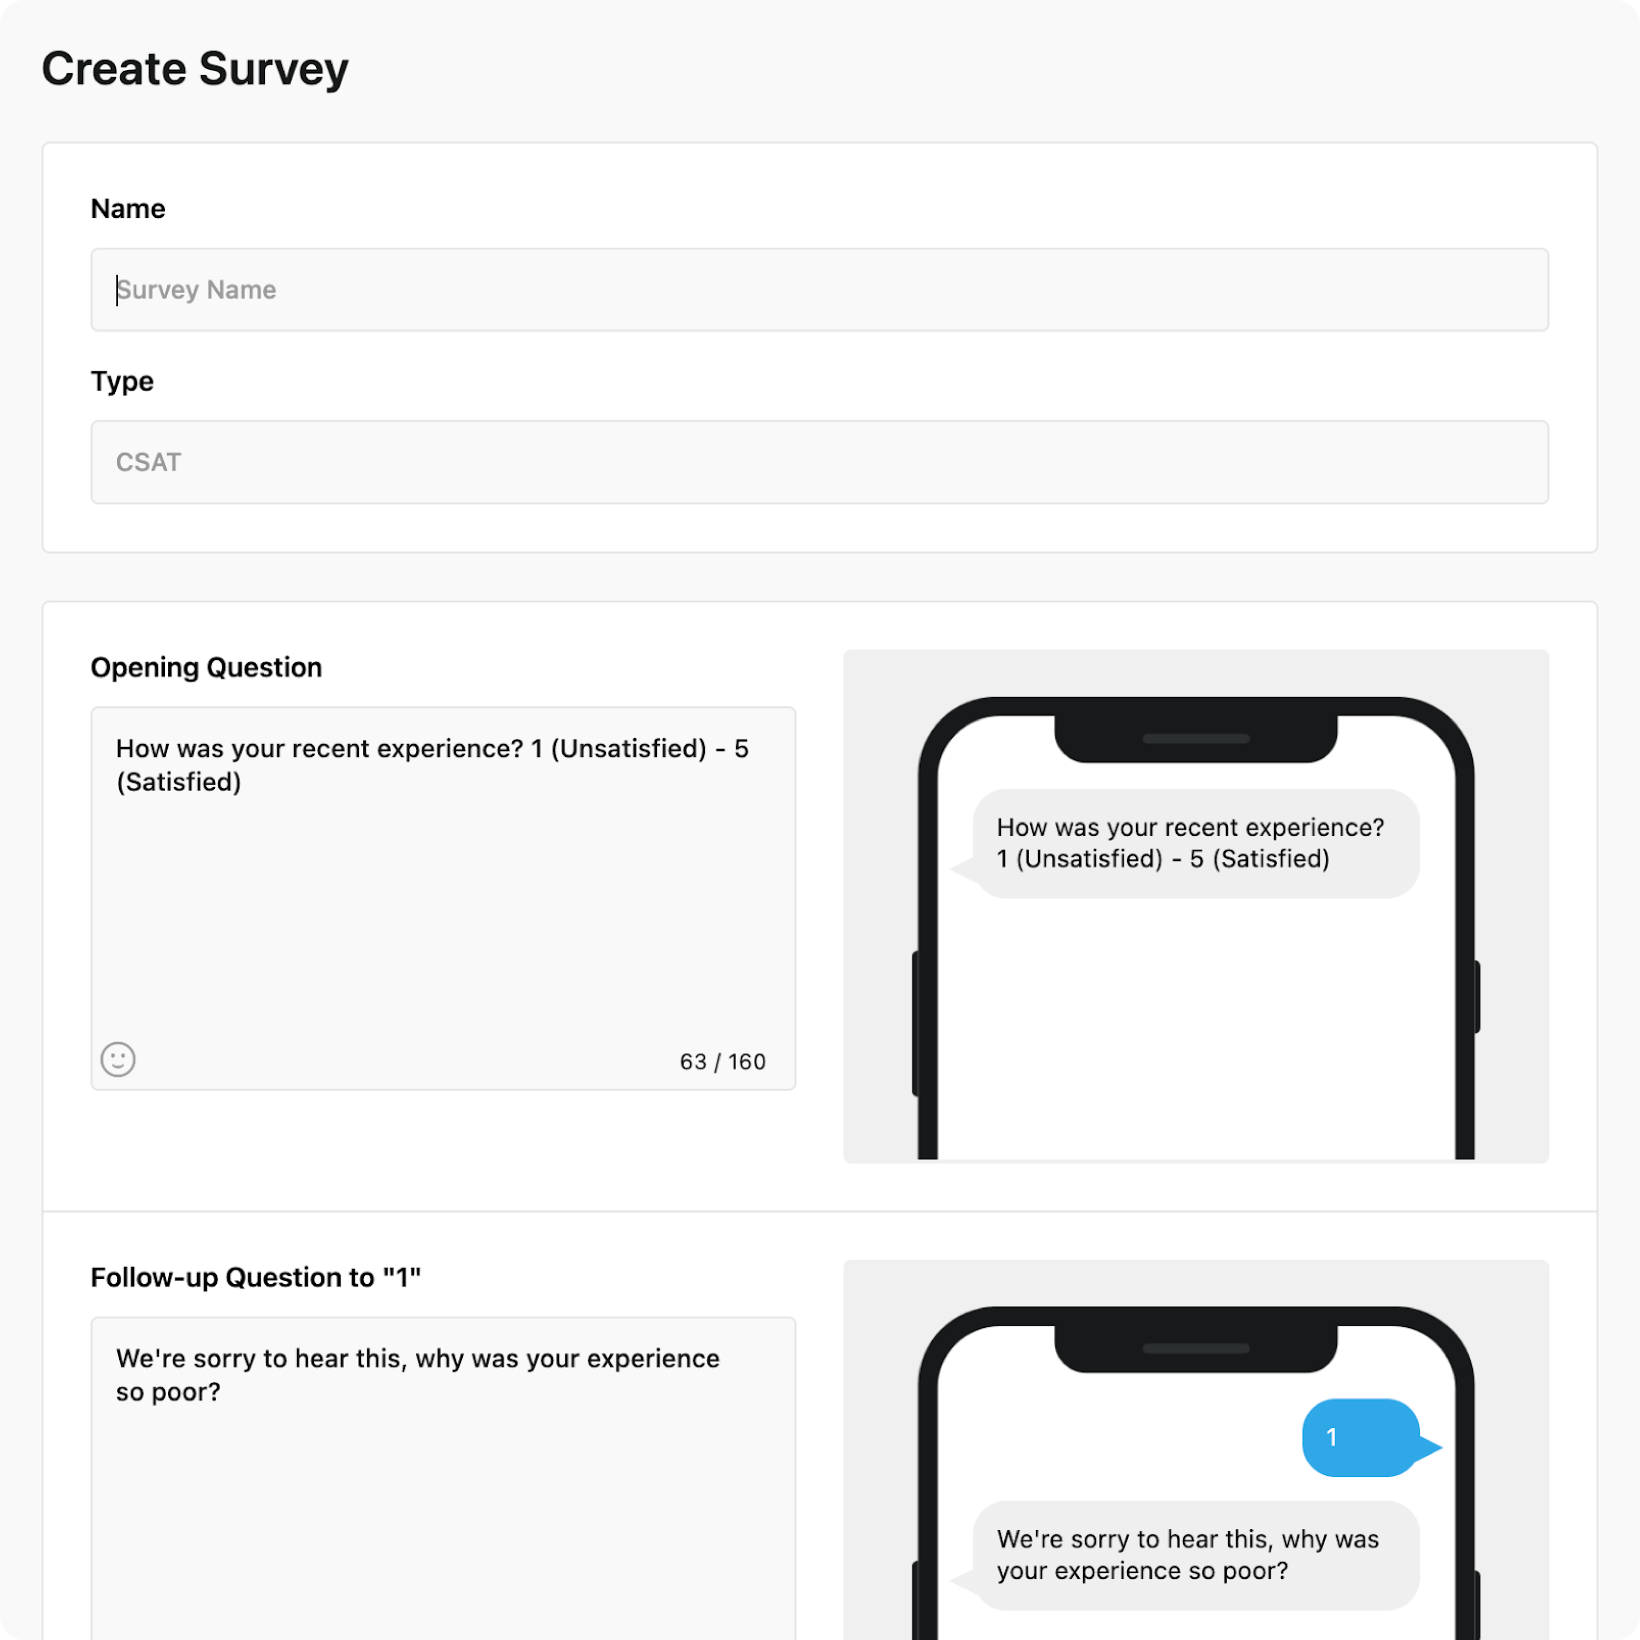 Building a chat-based SMS survey